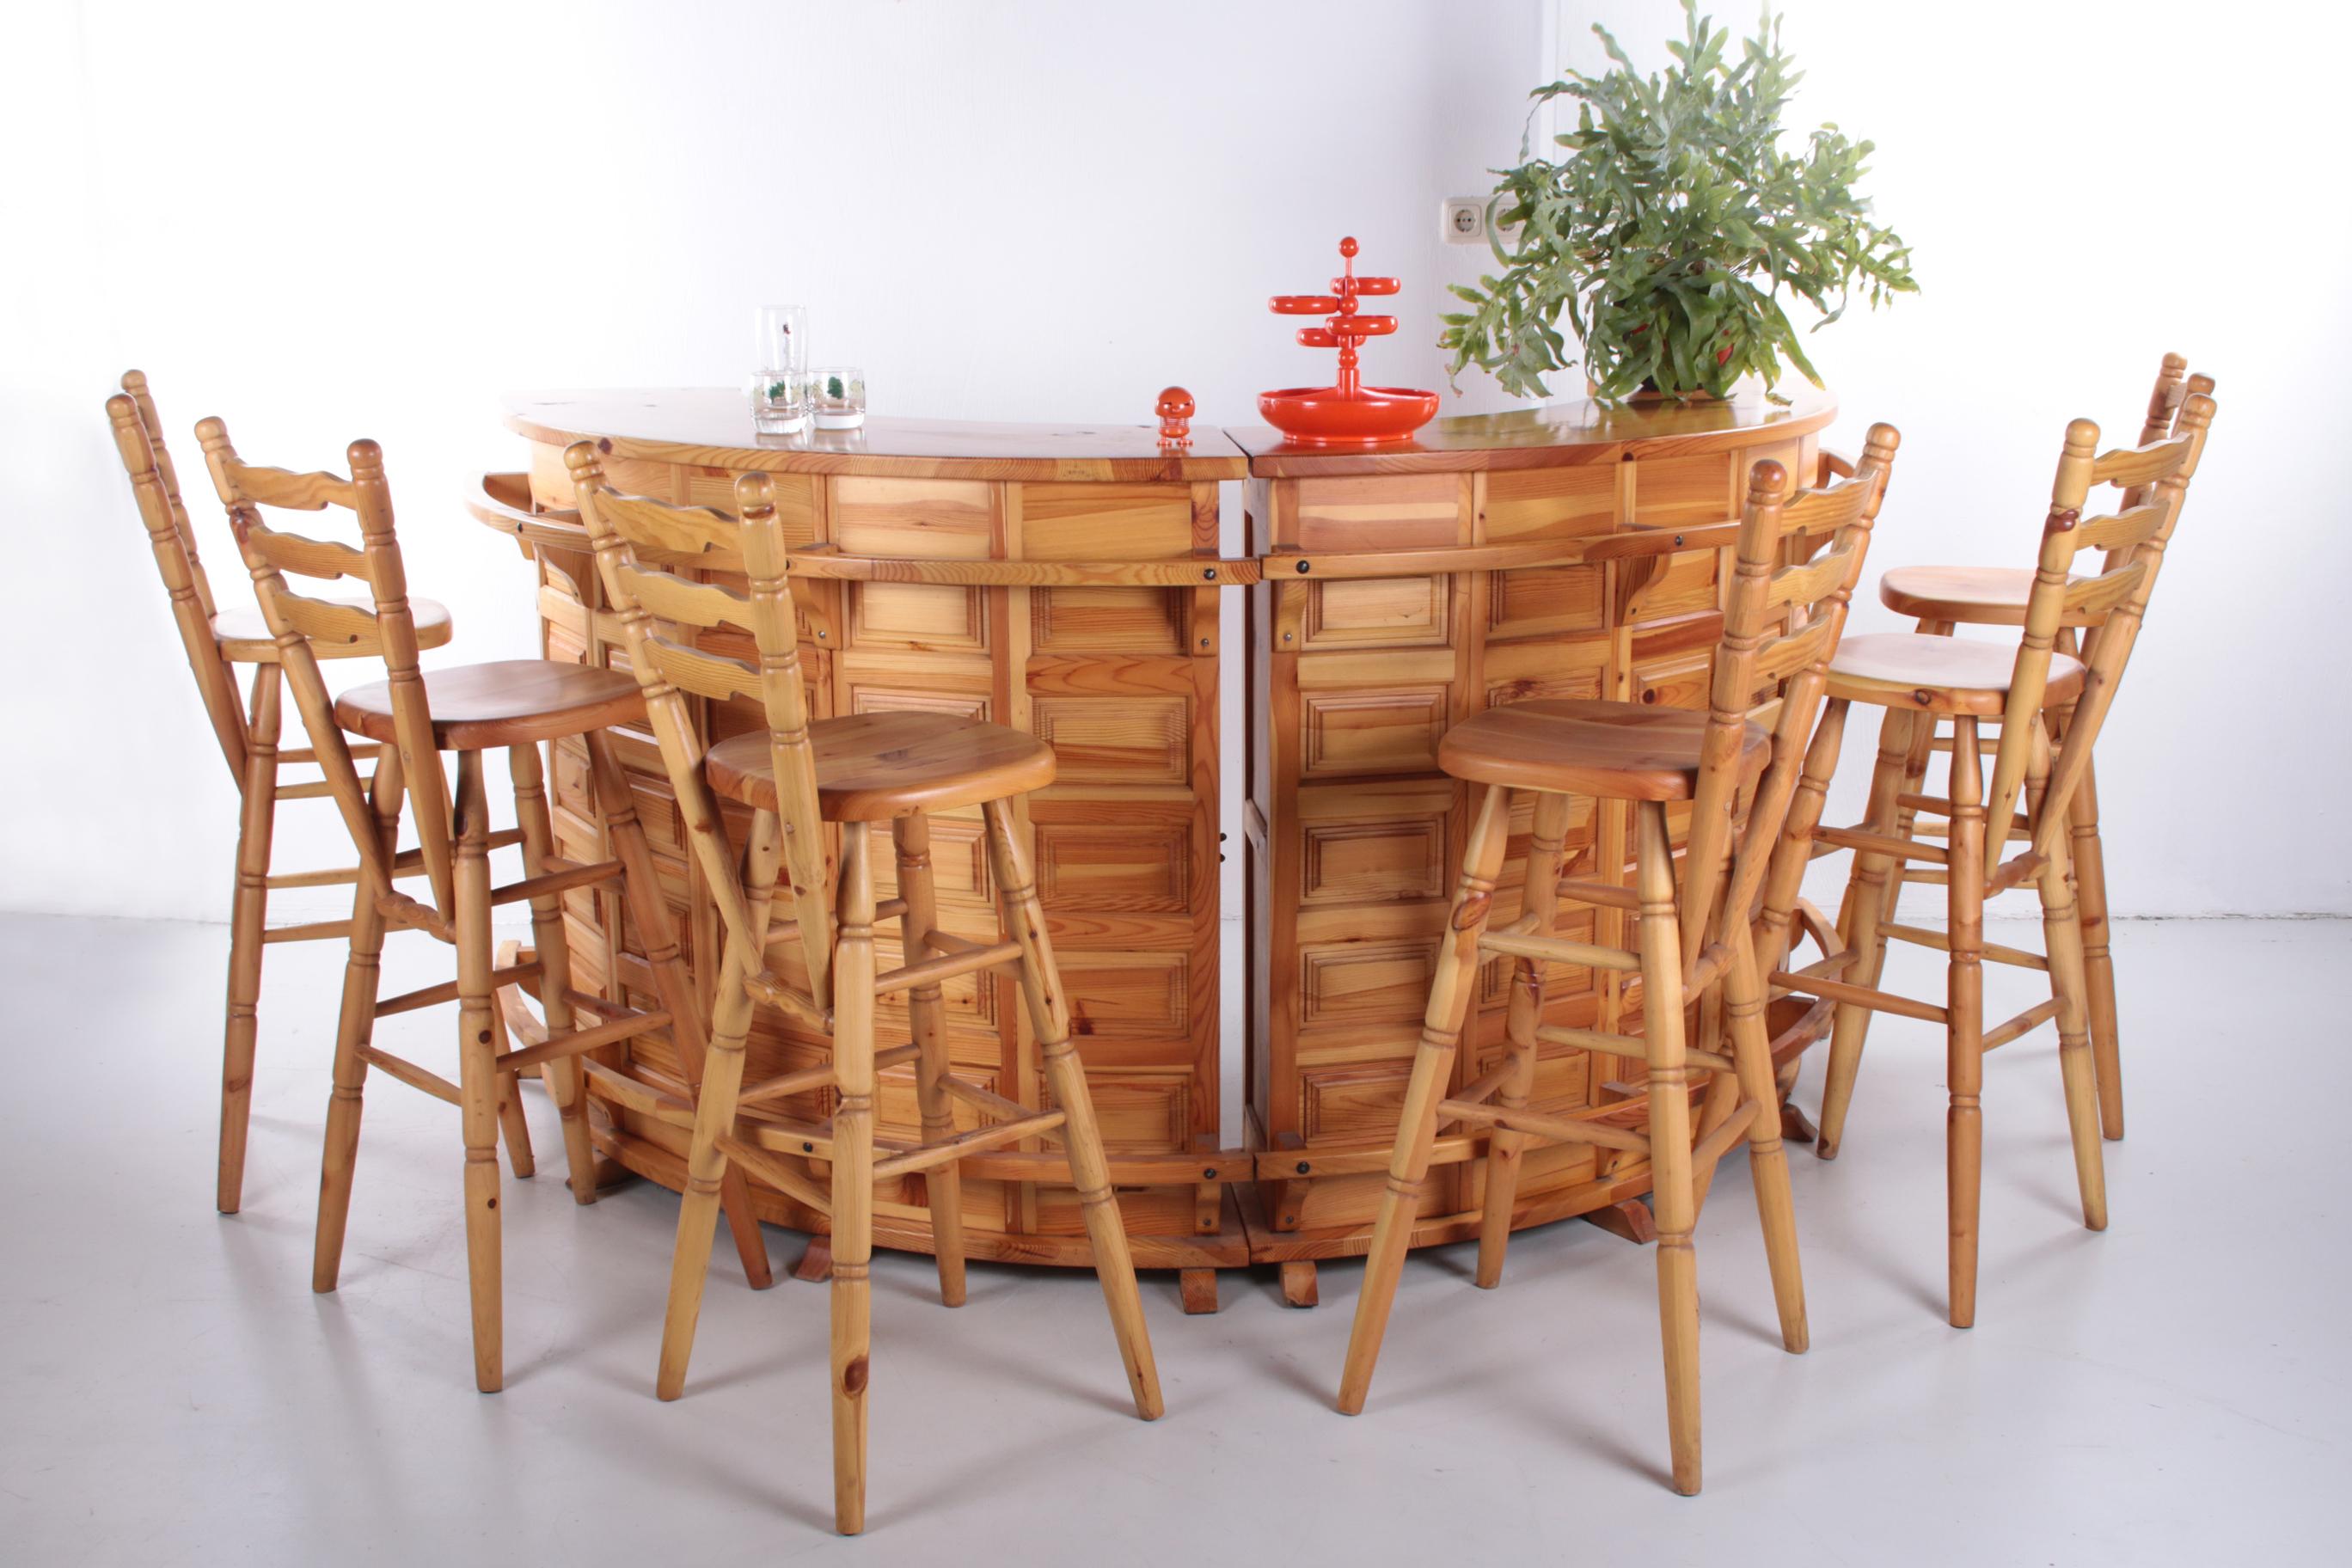 An unique feature of this large bar is that it consists of 2 parts that can be attached to each other. The beautiful set consists of 2 separate bars and six bar stools with backrest. The whole set is made of beautifully finished pine wood.

There